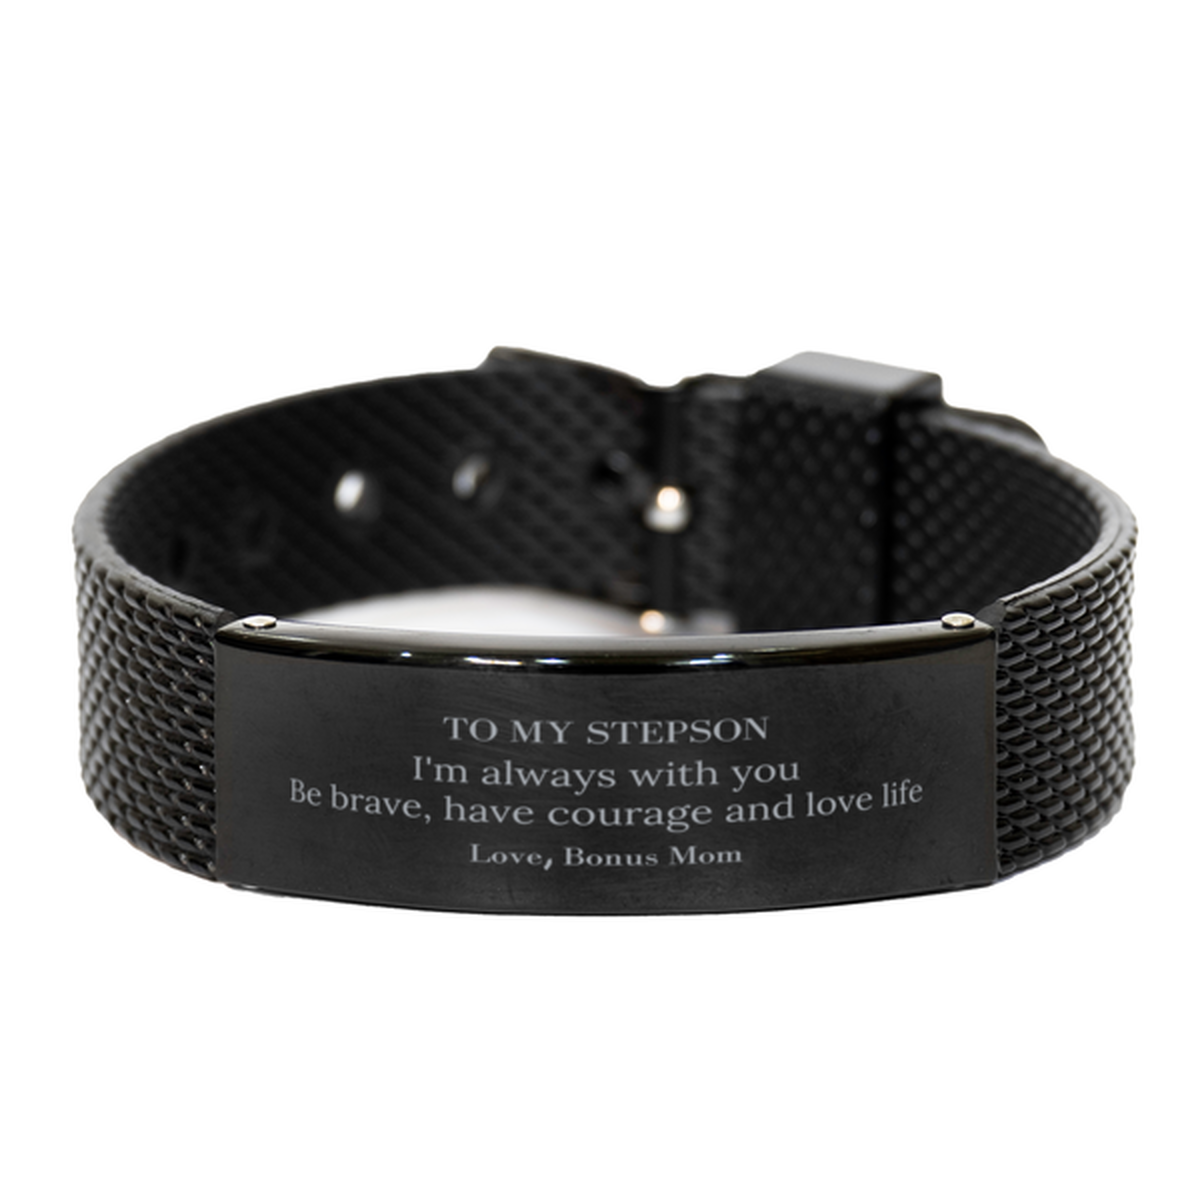 To My Stepson Gifts from Bonus Mom, Unique Black Shark Mesh Bracelet Inspirational Christmas Birthday Graduation Gifts for Stepson I'm always with you. Be brave, have courage and love life. Love, Bonus Mom